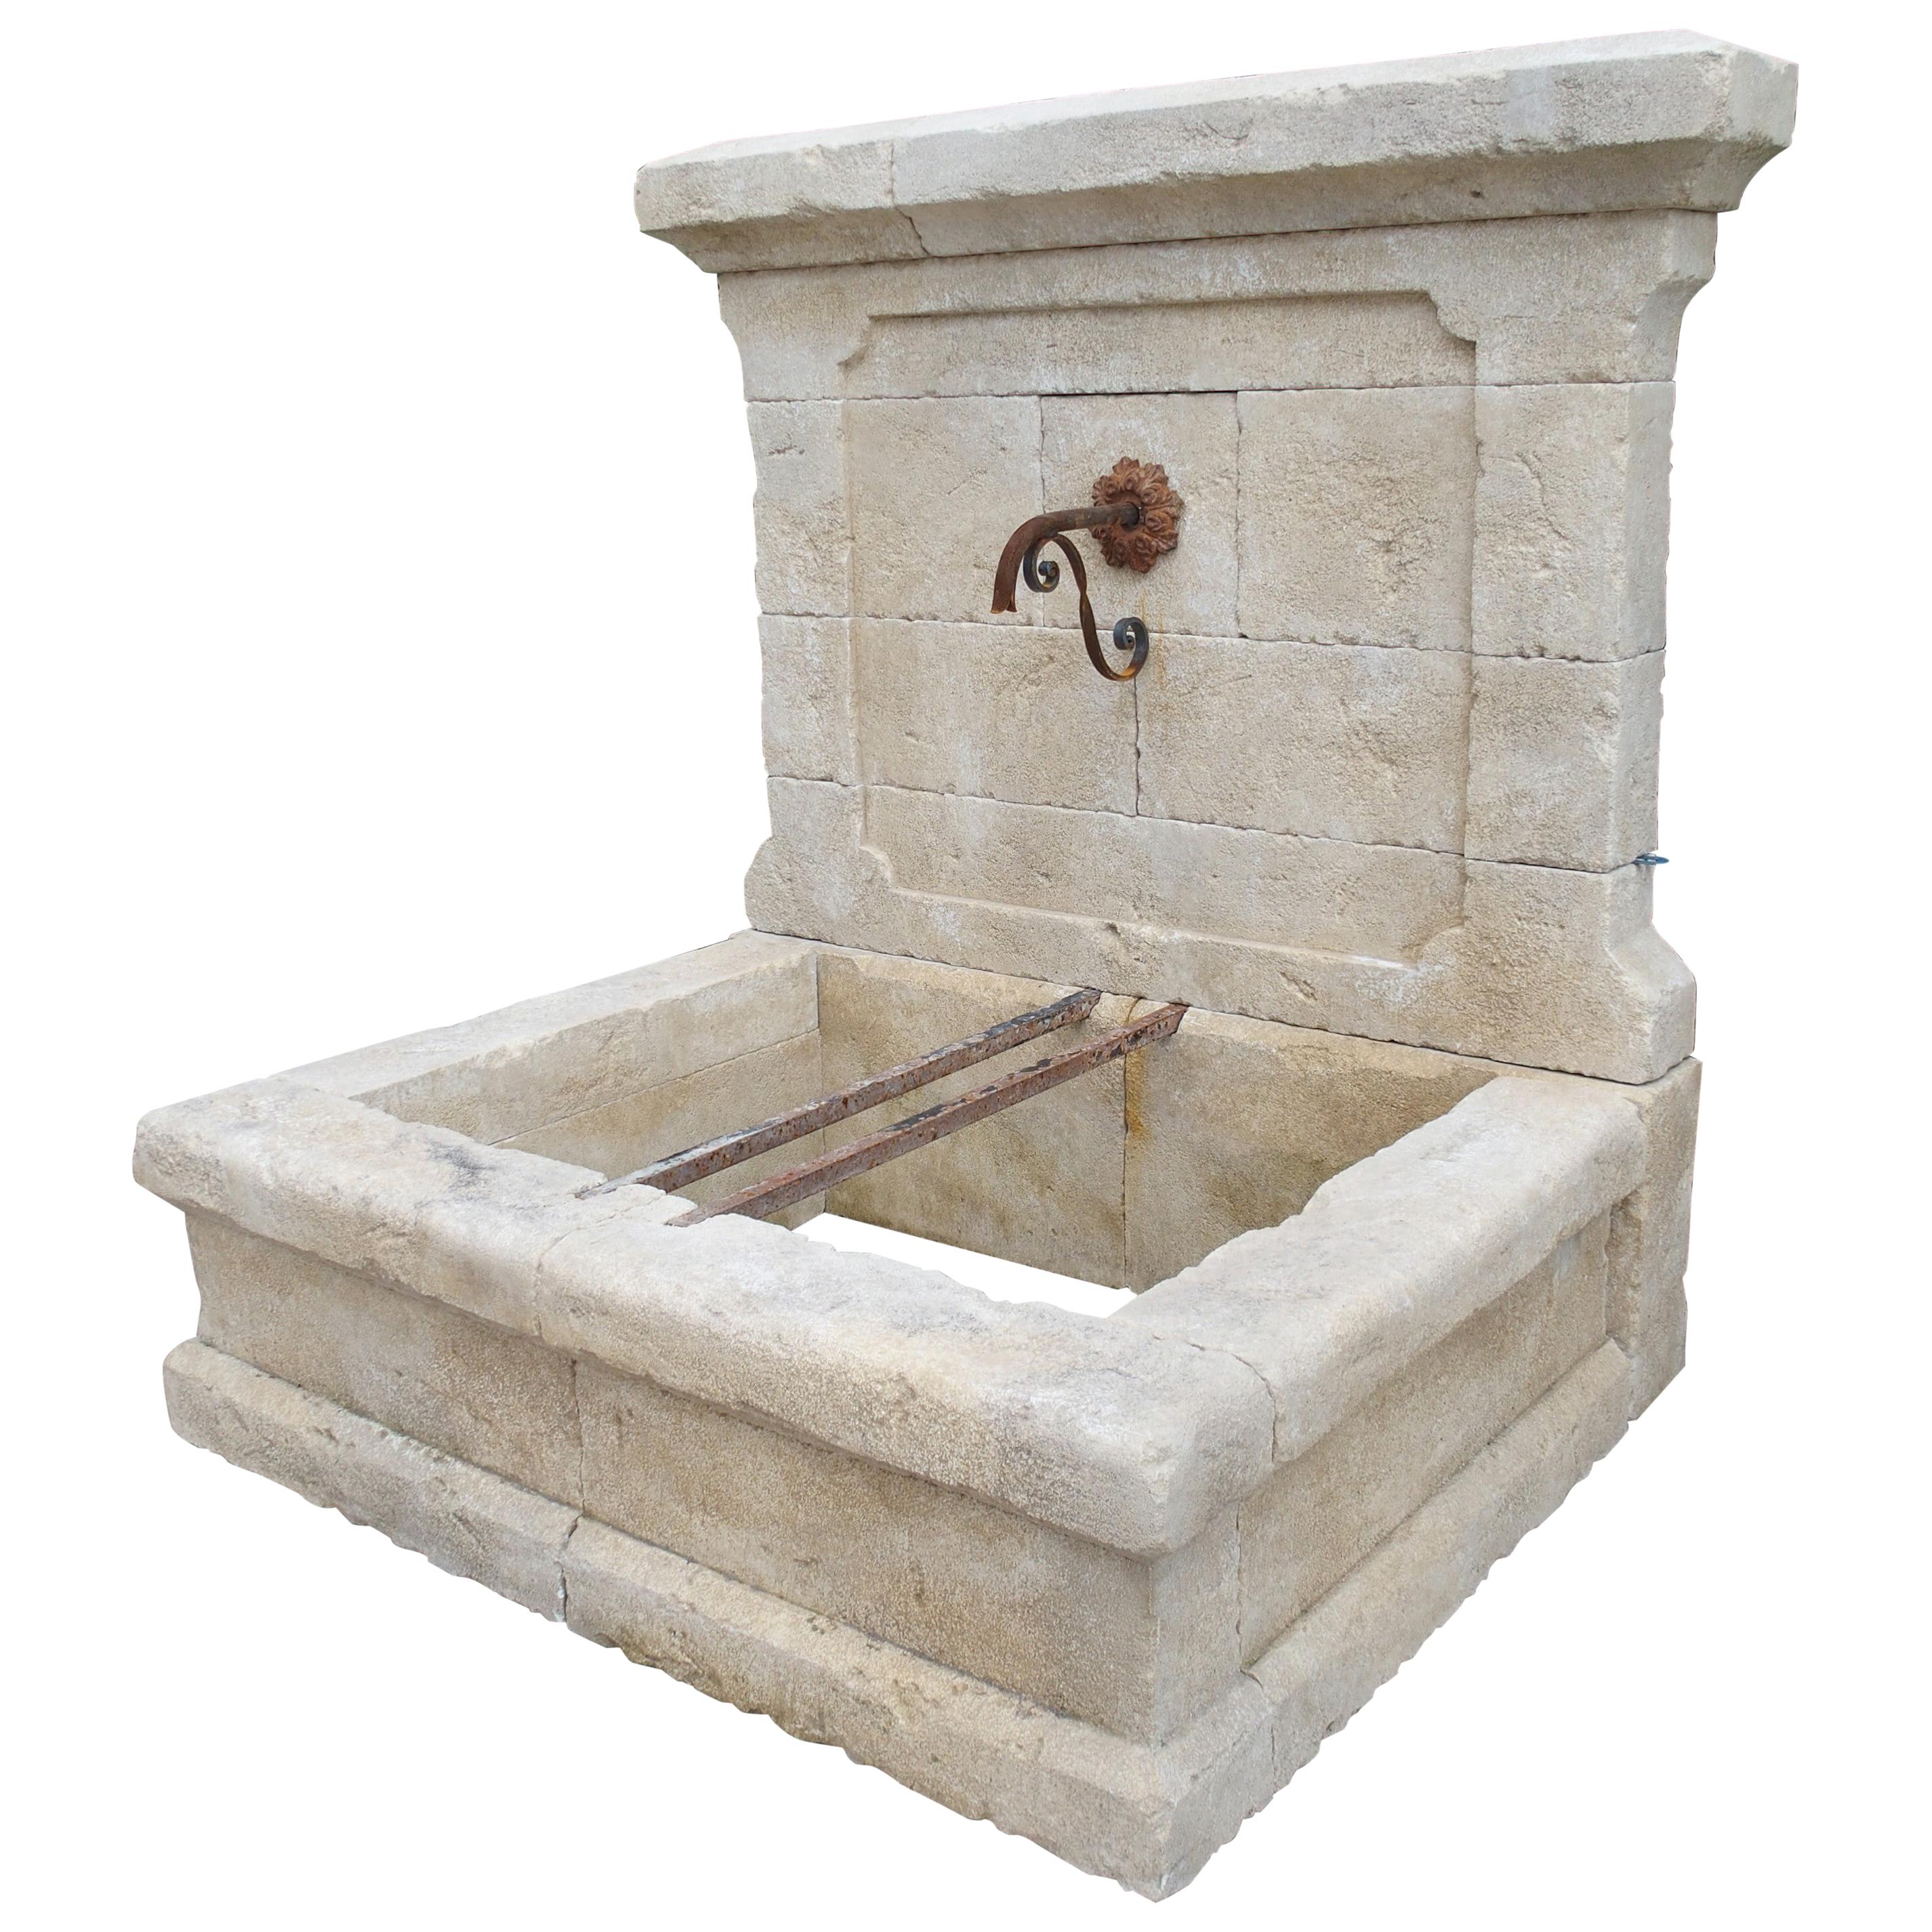 Carved Estaillade Stone Wall Fountain from Provence, France